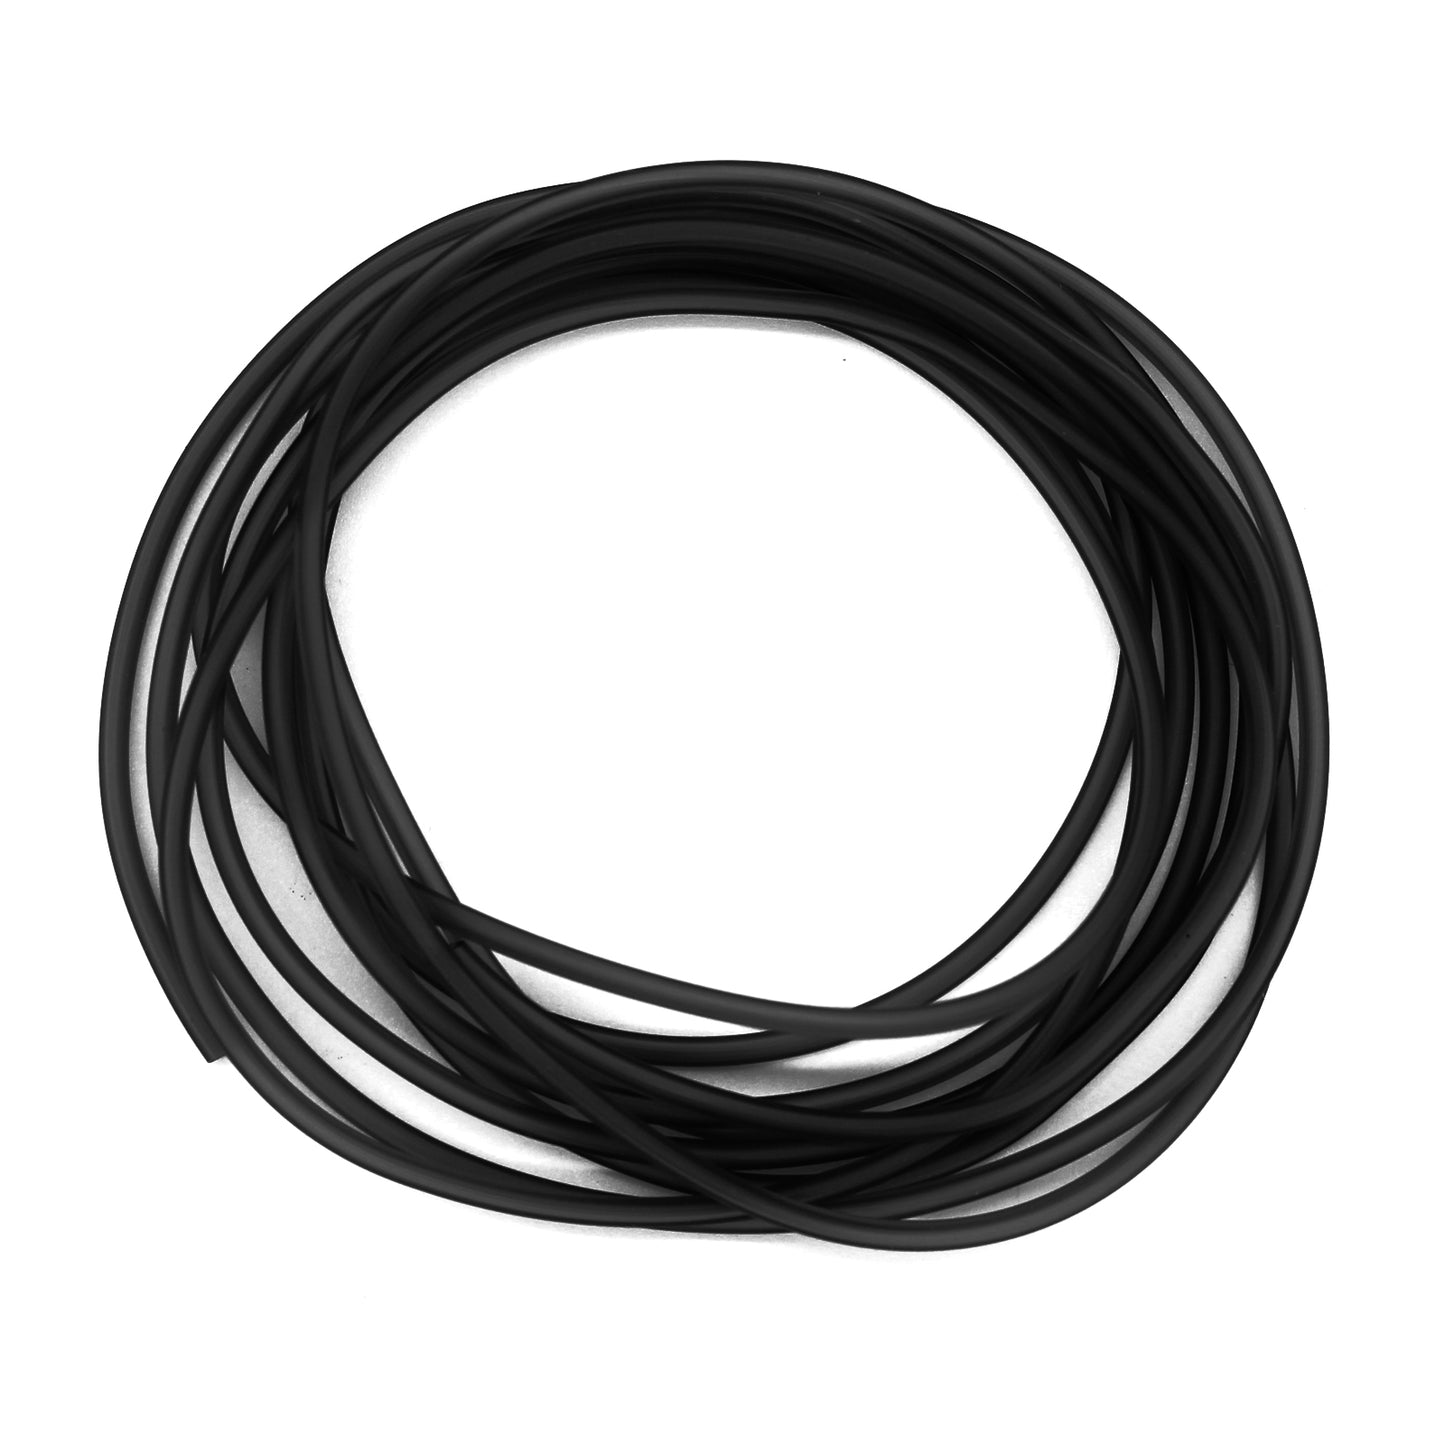 Deception Angling Silicon Tubing for Fishing in Silt Grey